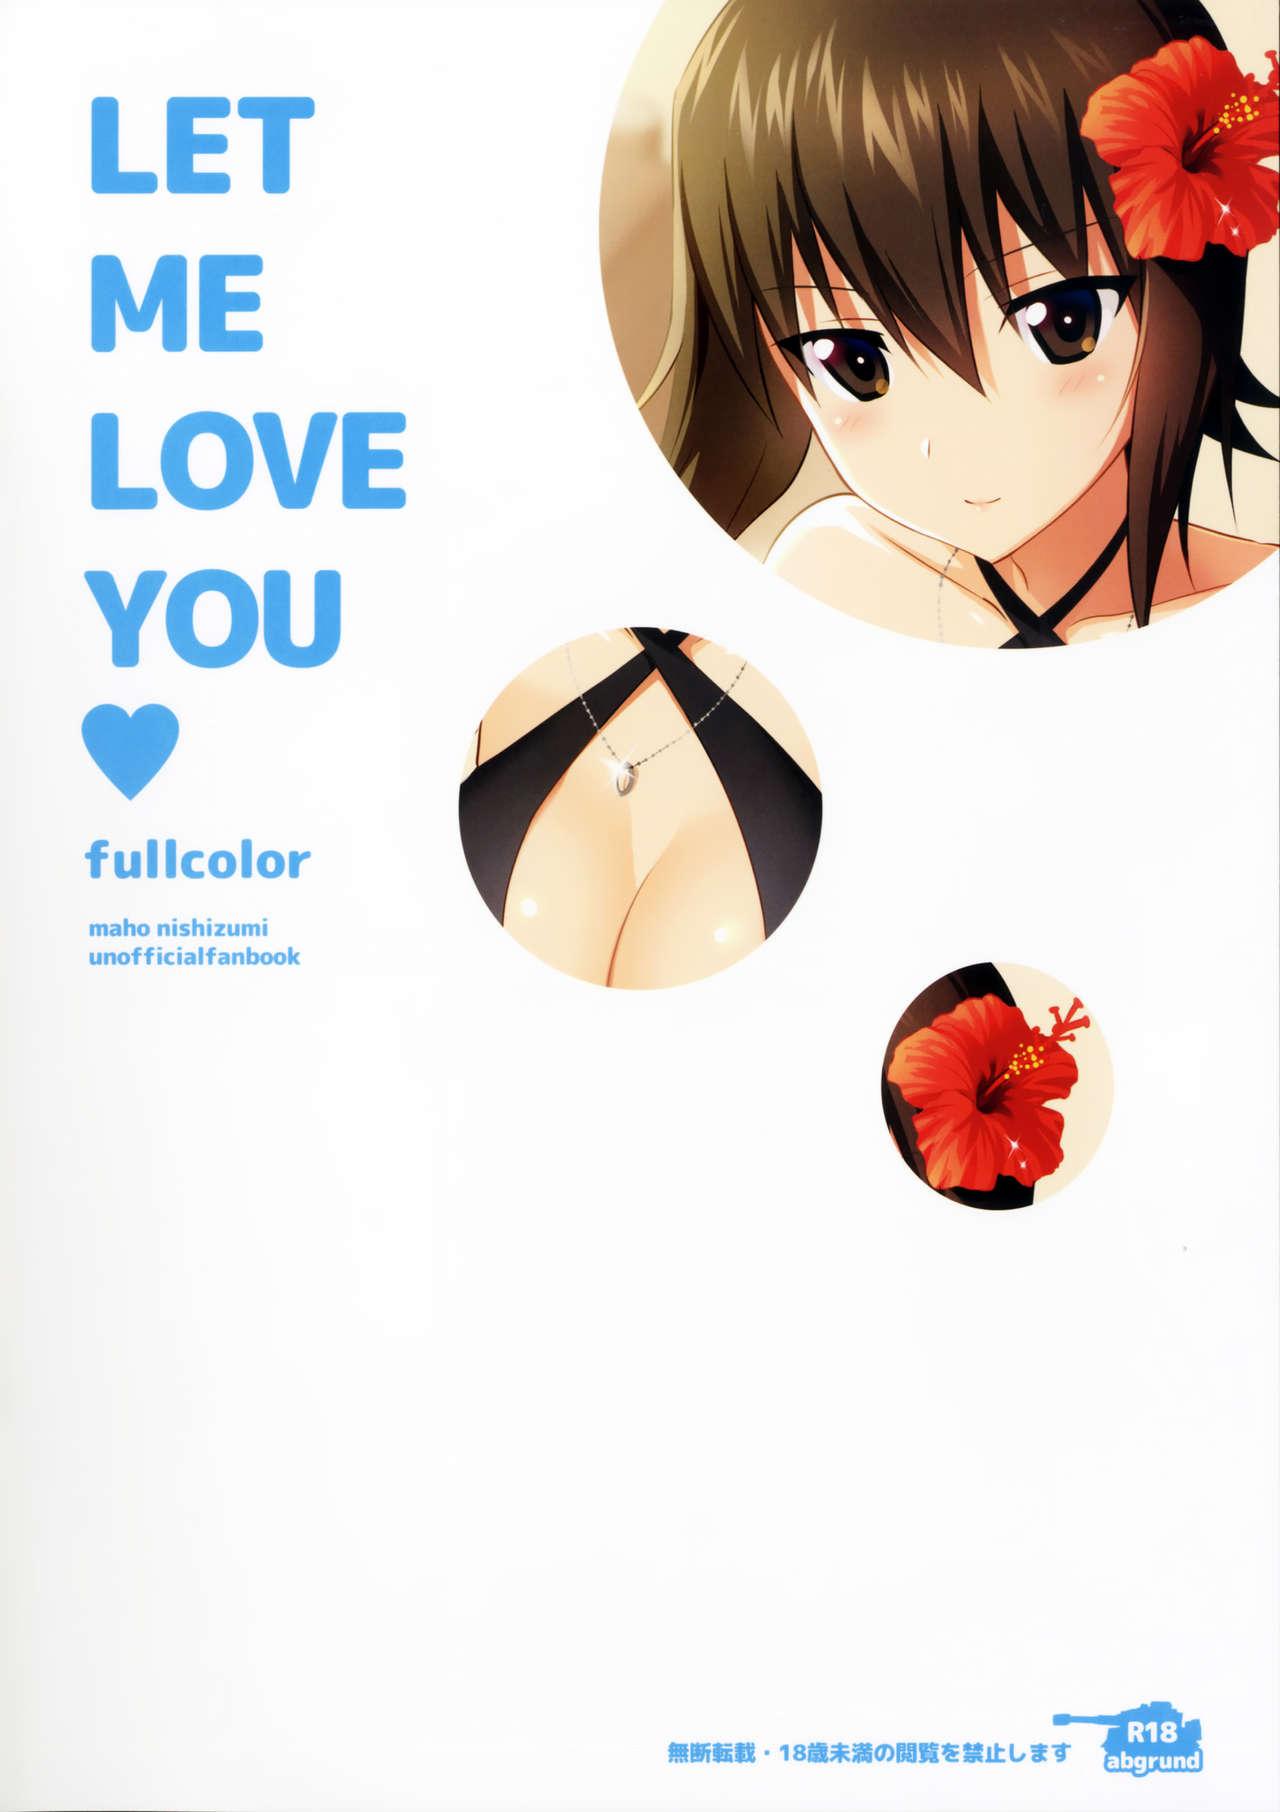 Small Tits Porn LET ME LOVE YOU fullcolor - Girls und panzer Putaria - Page 19